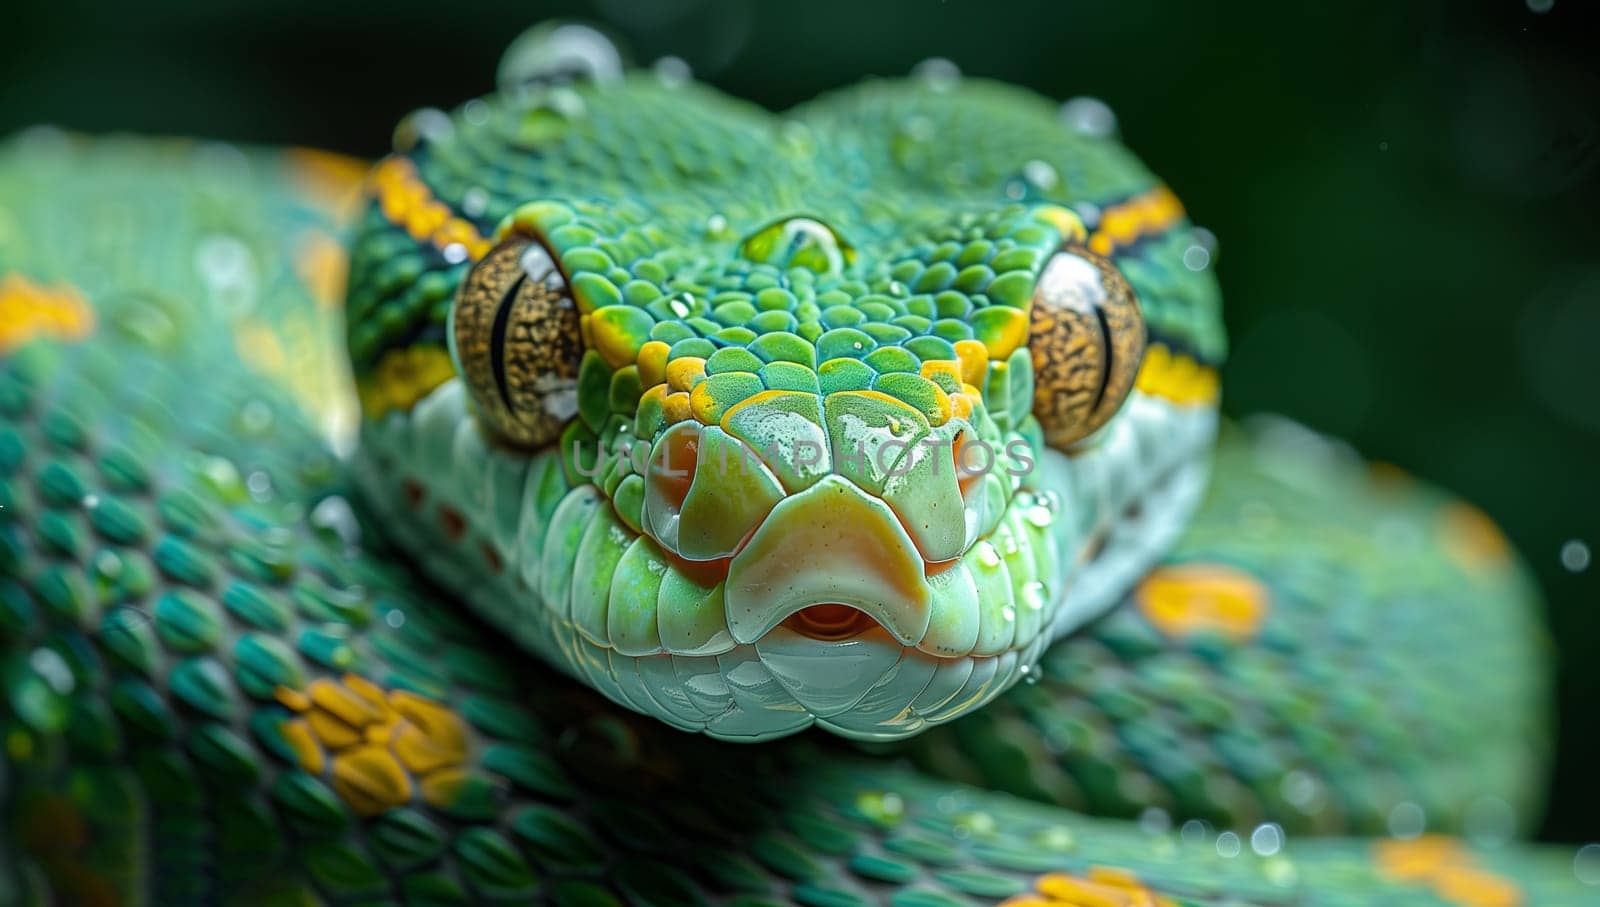 Macro photography capturing the striking image of a scaled reptile, a green snake with electric blue markings and yellow eyes, in its terrestrial habitat in the jungle